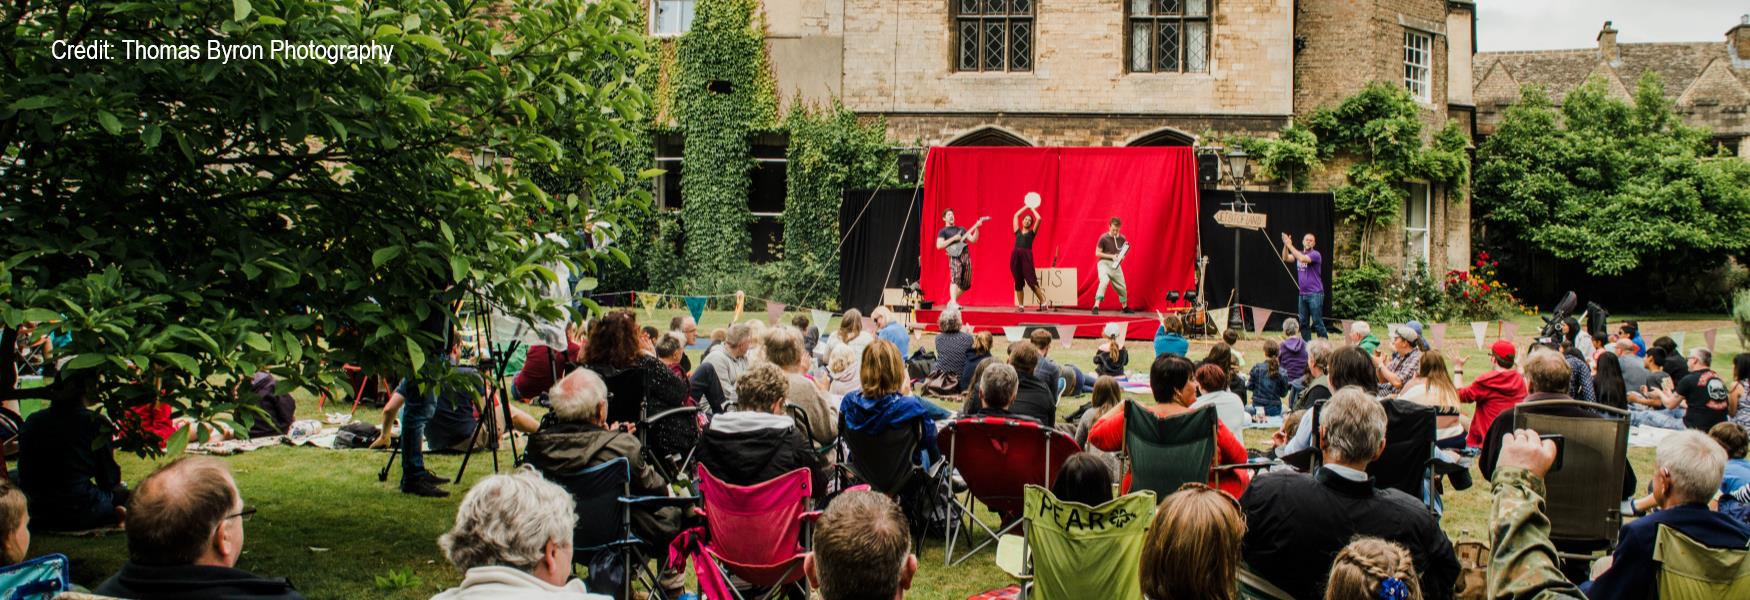 An outdoor play by Lamphouse Theatre company from Peterborough